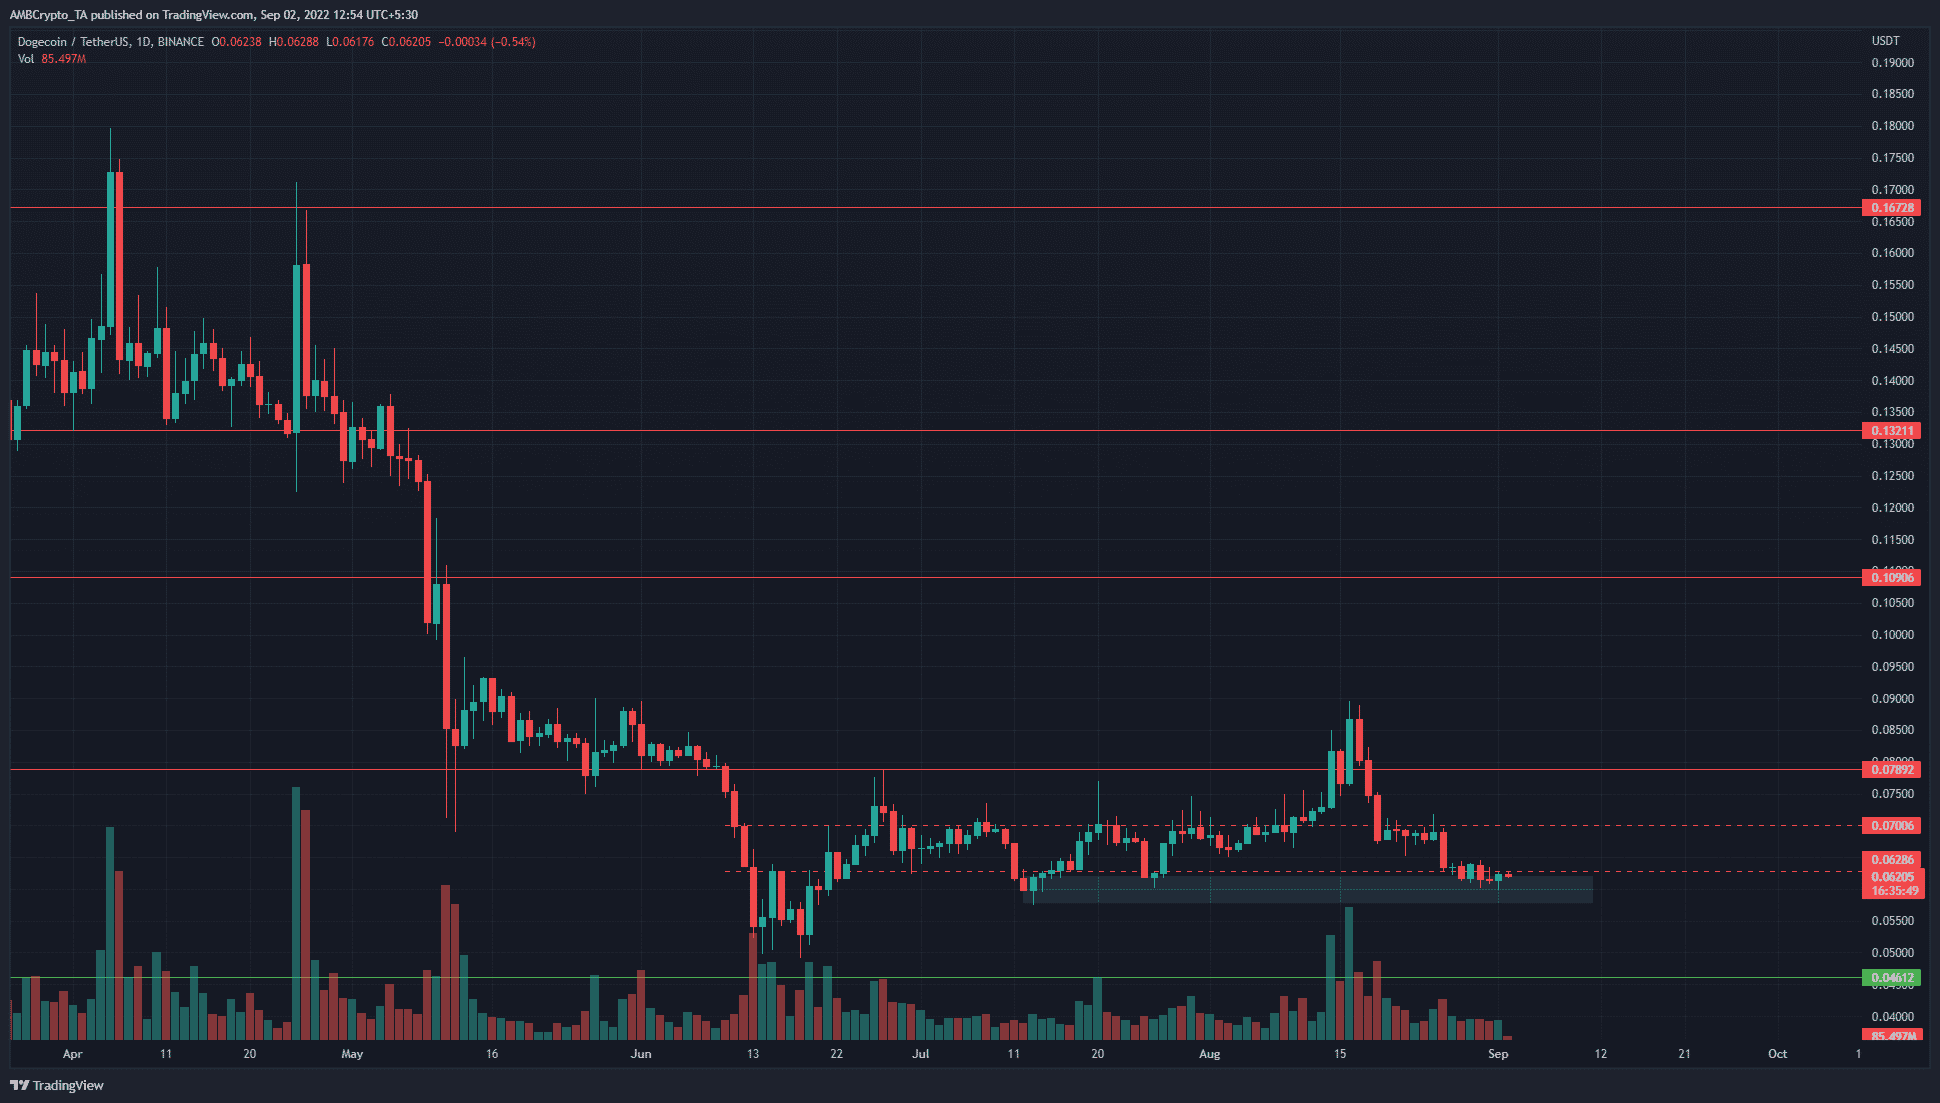 Dogecoin finds some footing in a support zone, but momentum favored the bears